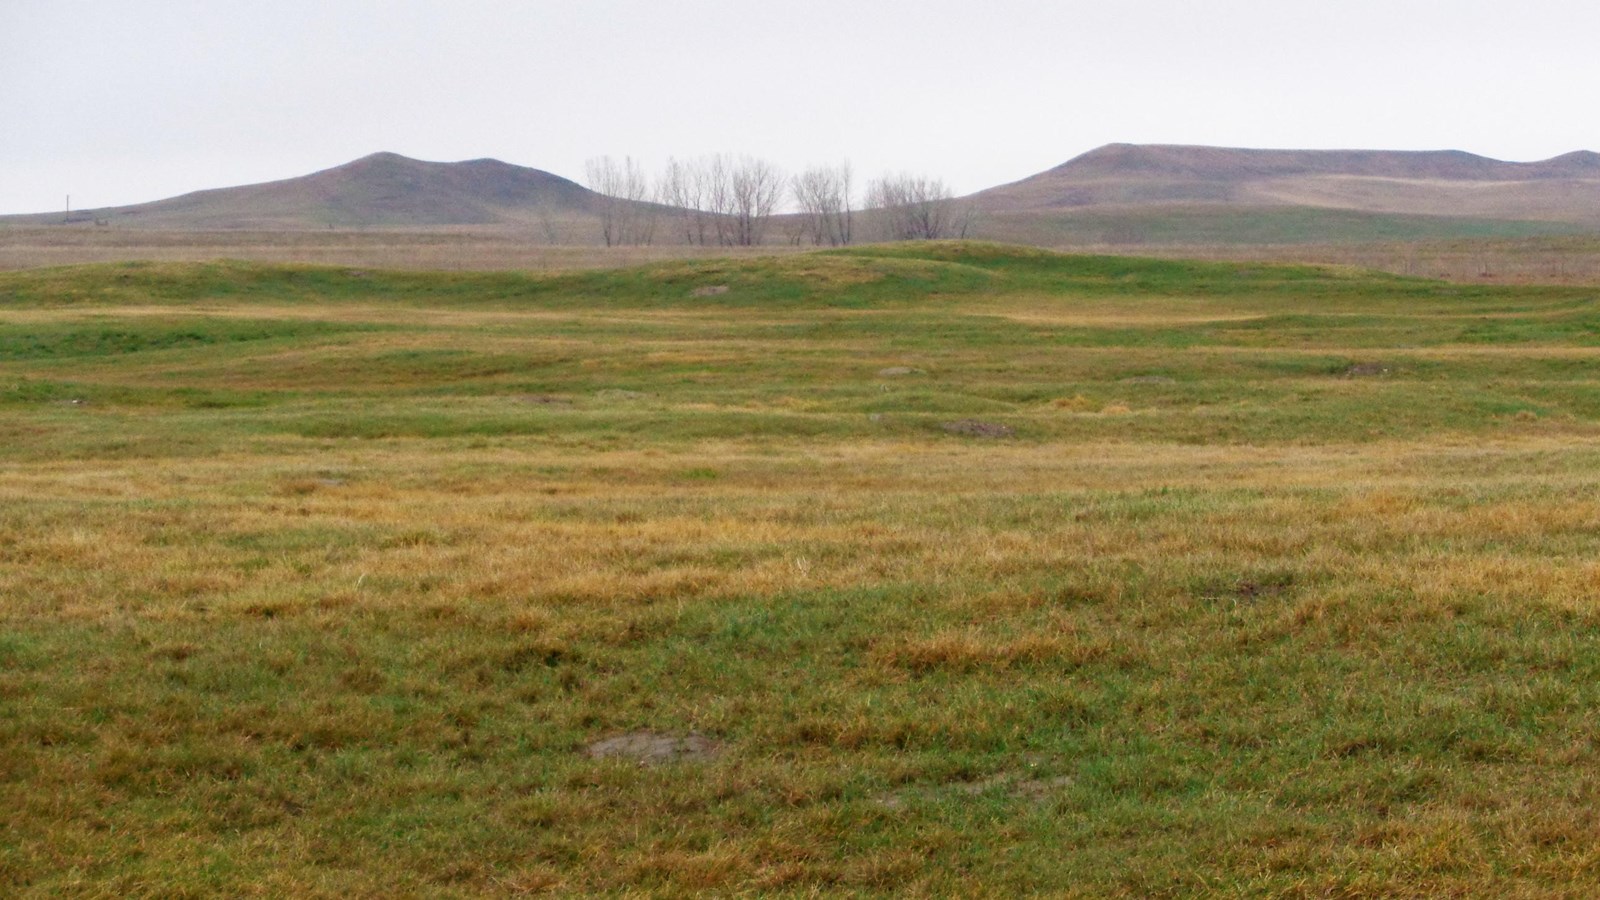 Grassy field with indentations for earthlodges